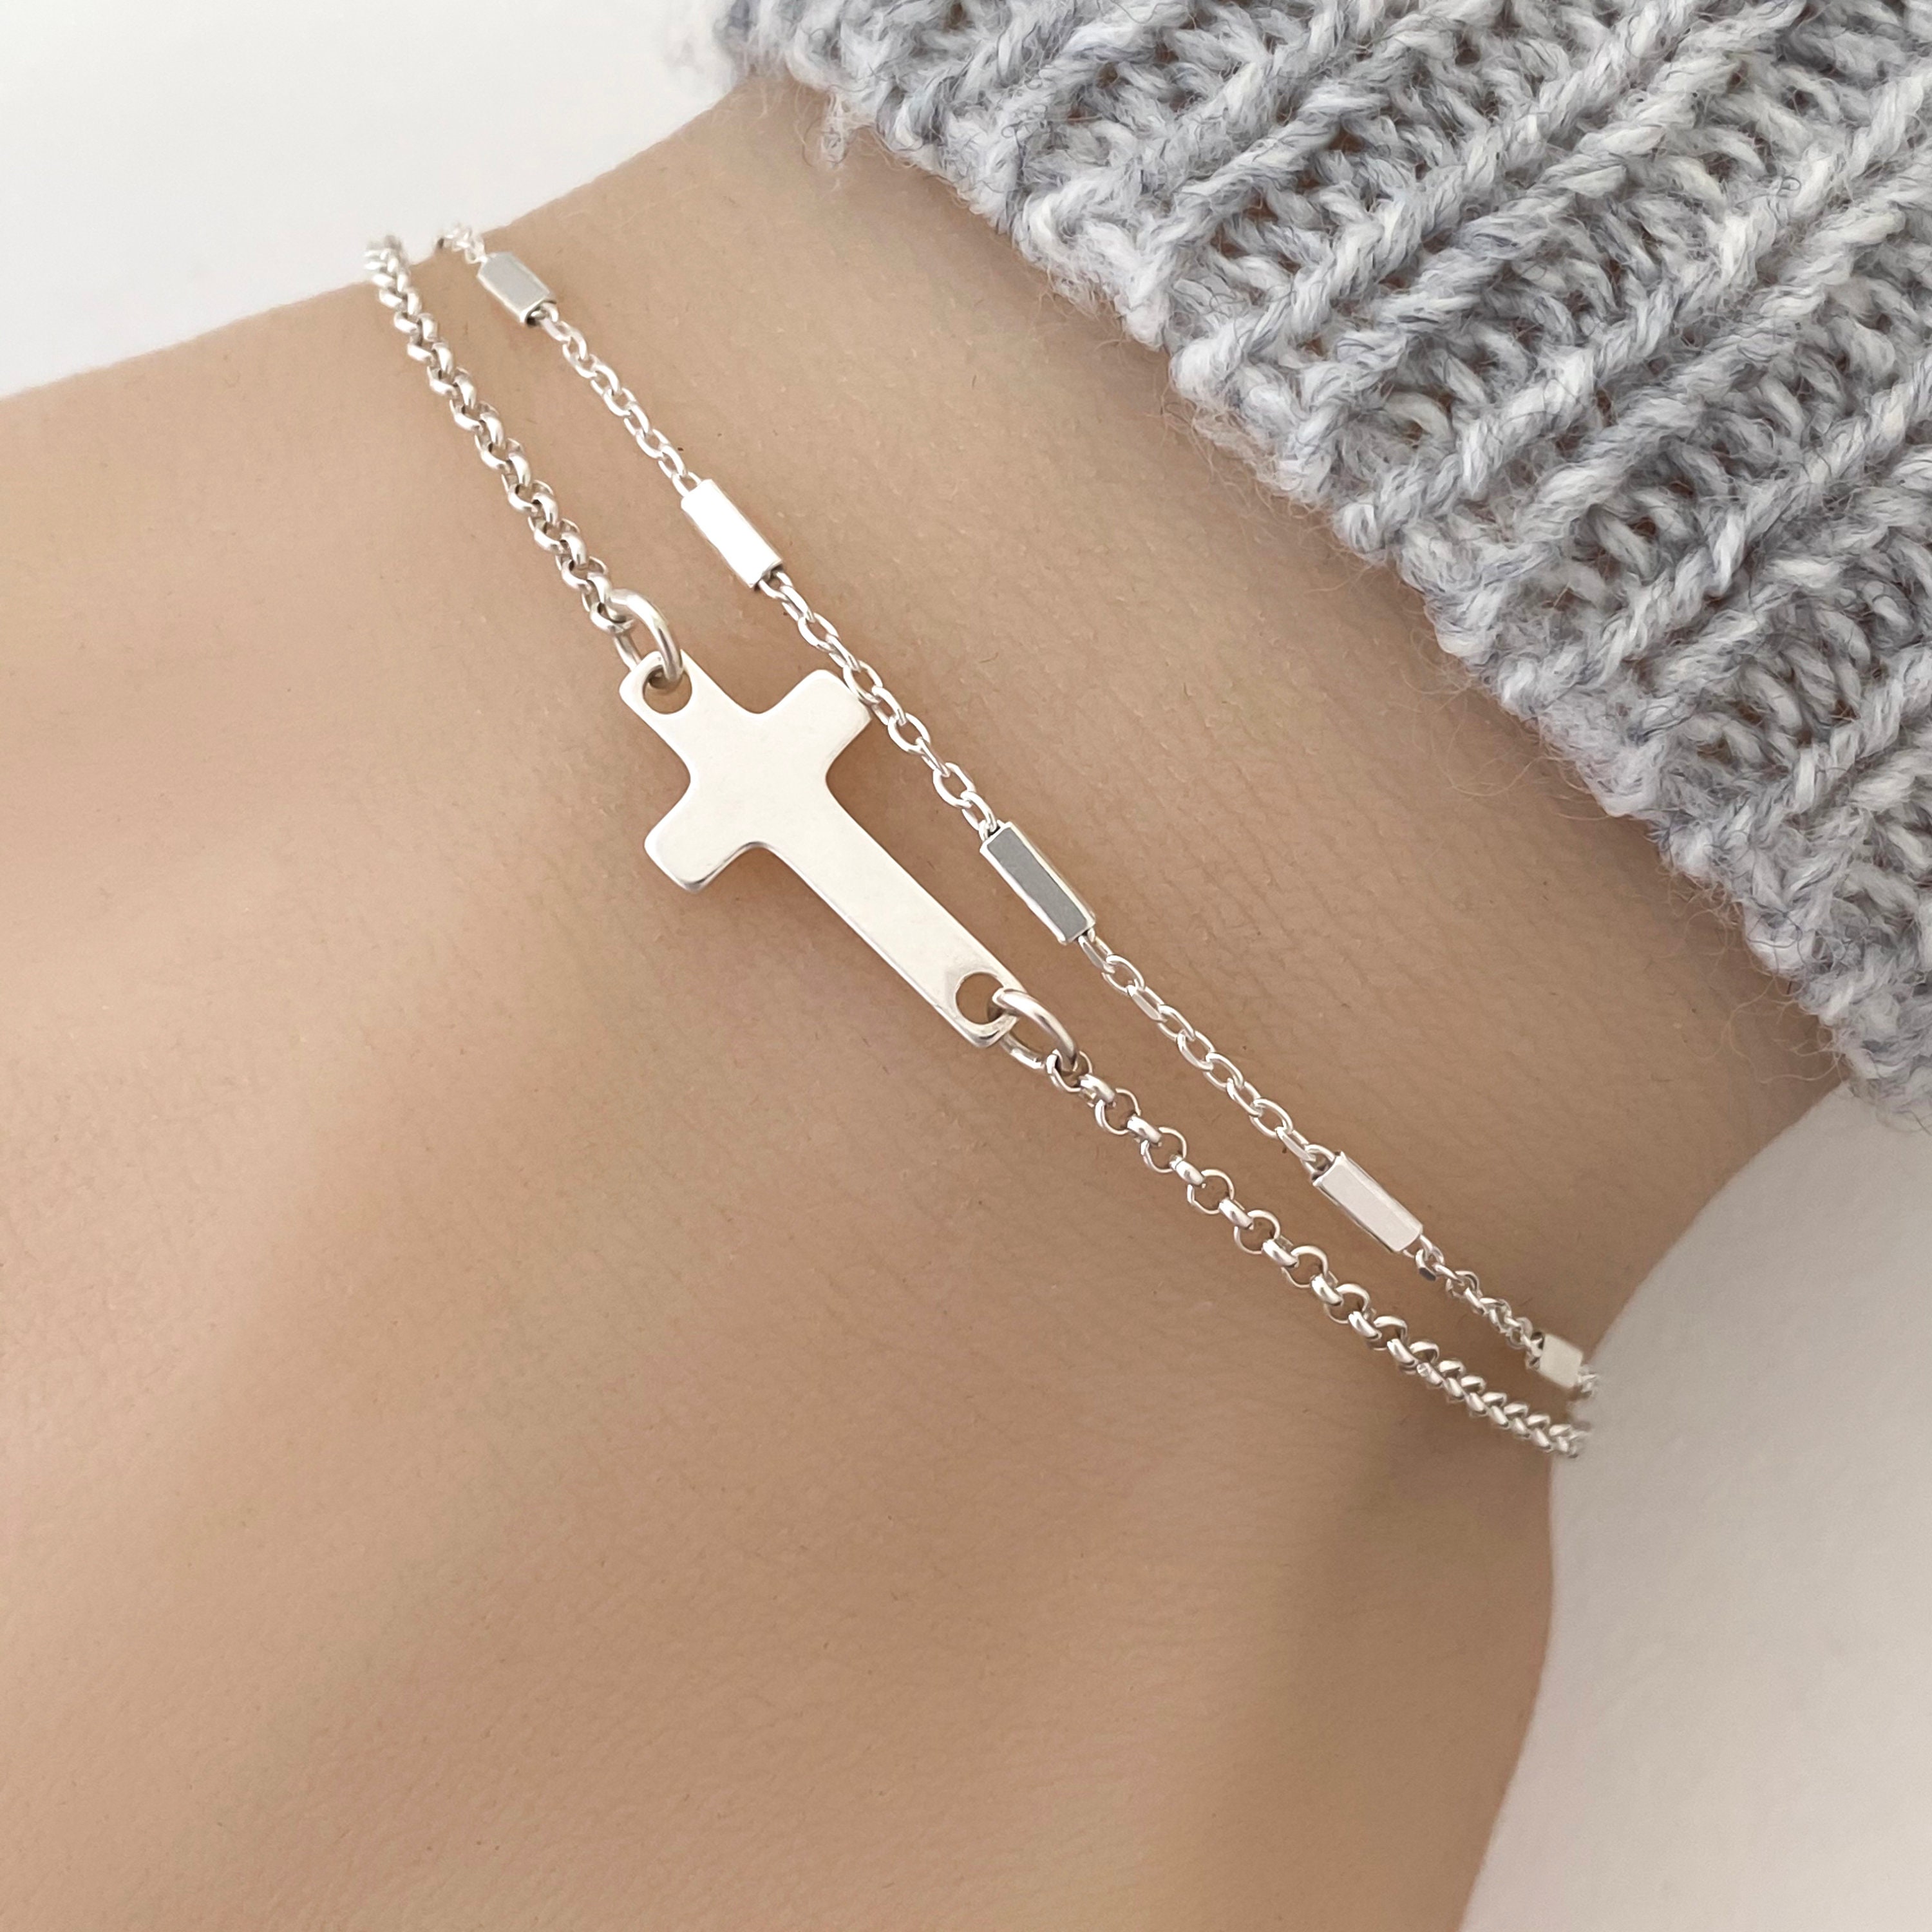 gift idea for the partner with gift box adjustable in length Bracelet with cross in grey-silver fabric bracelet with cross pendant